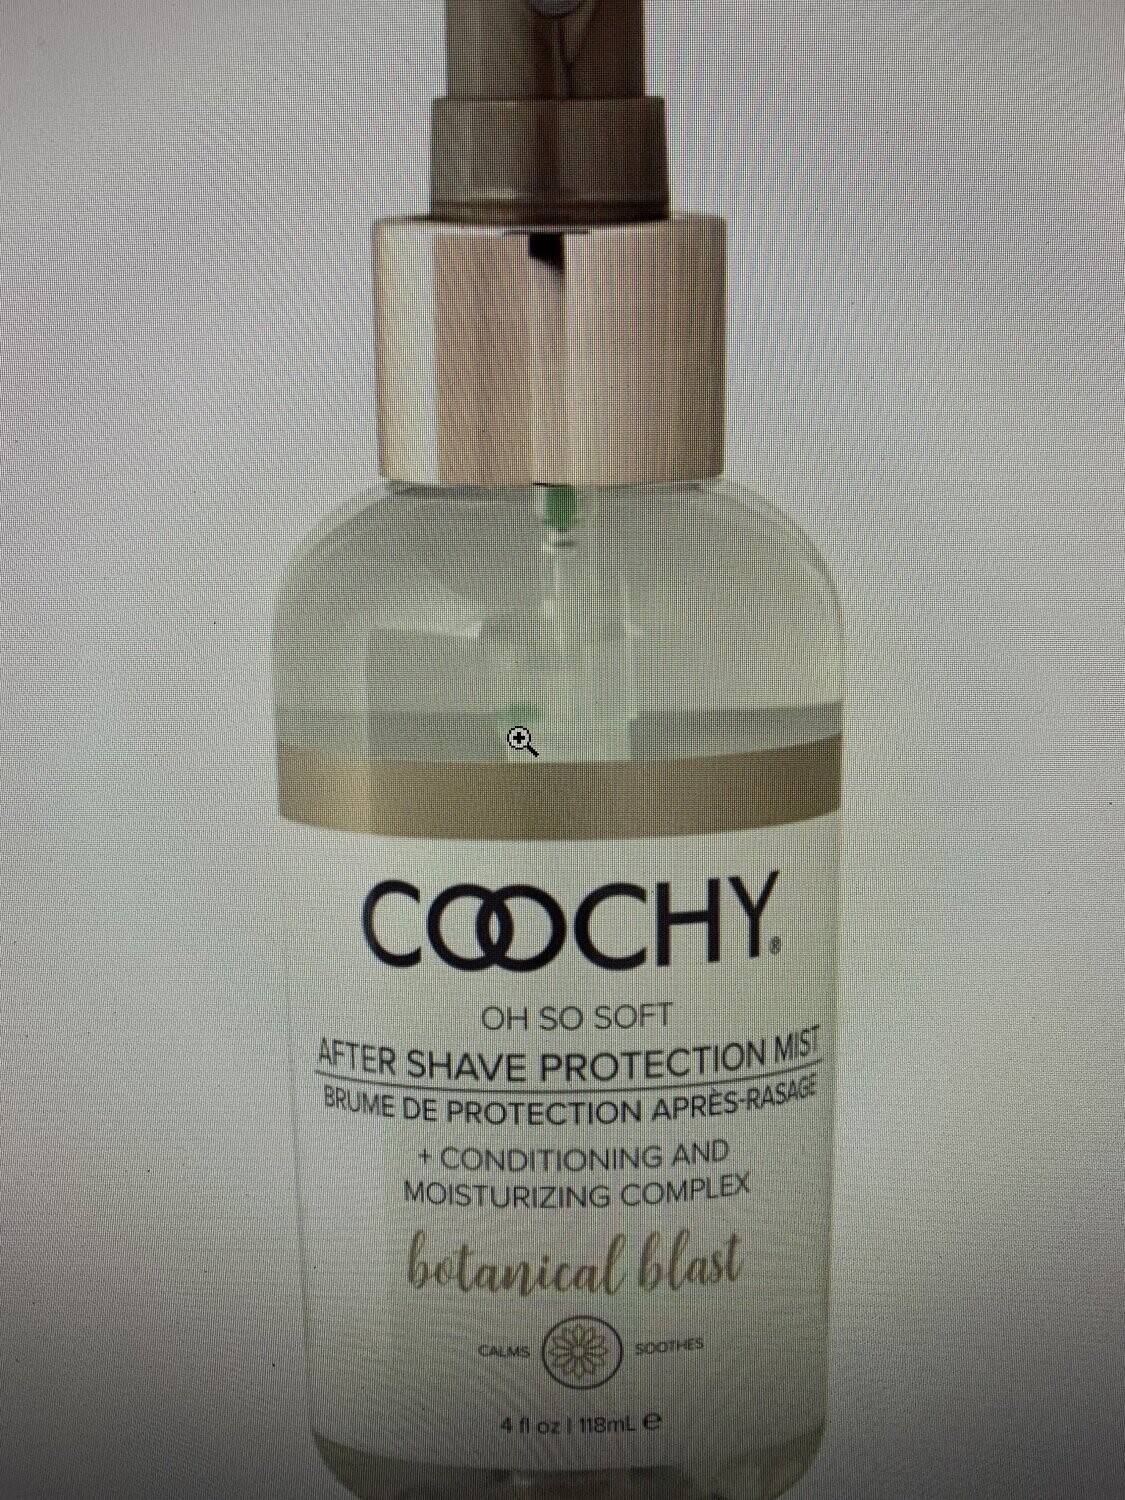 Coochy Aftershave Mist